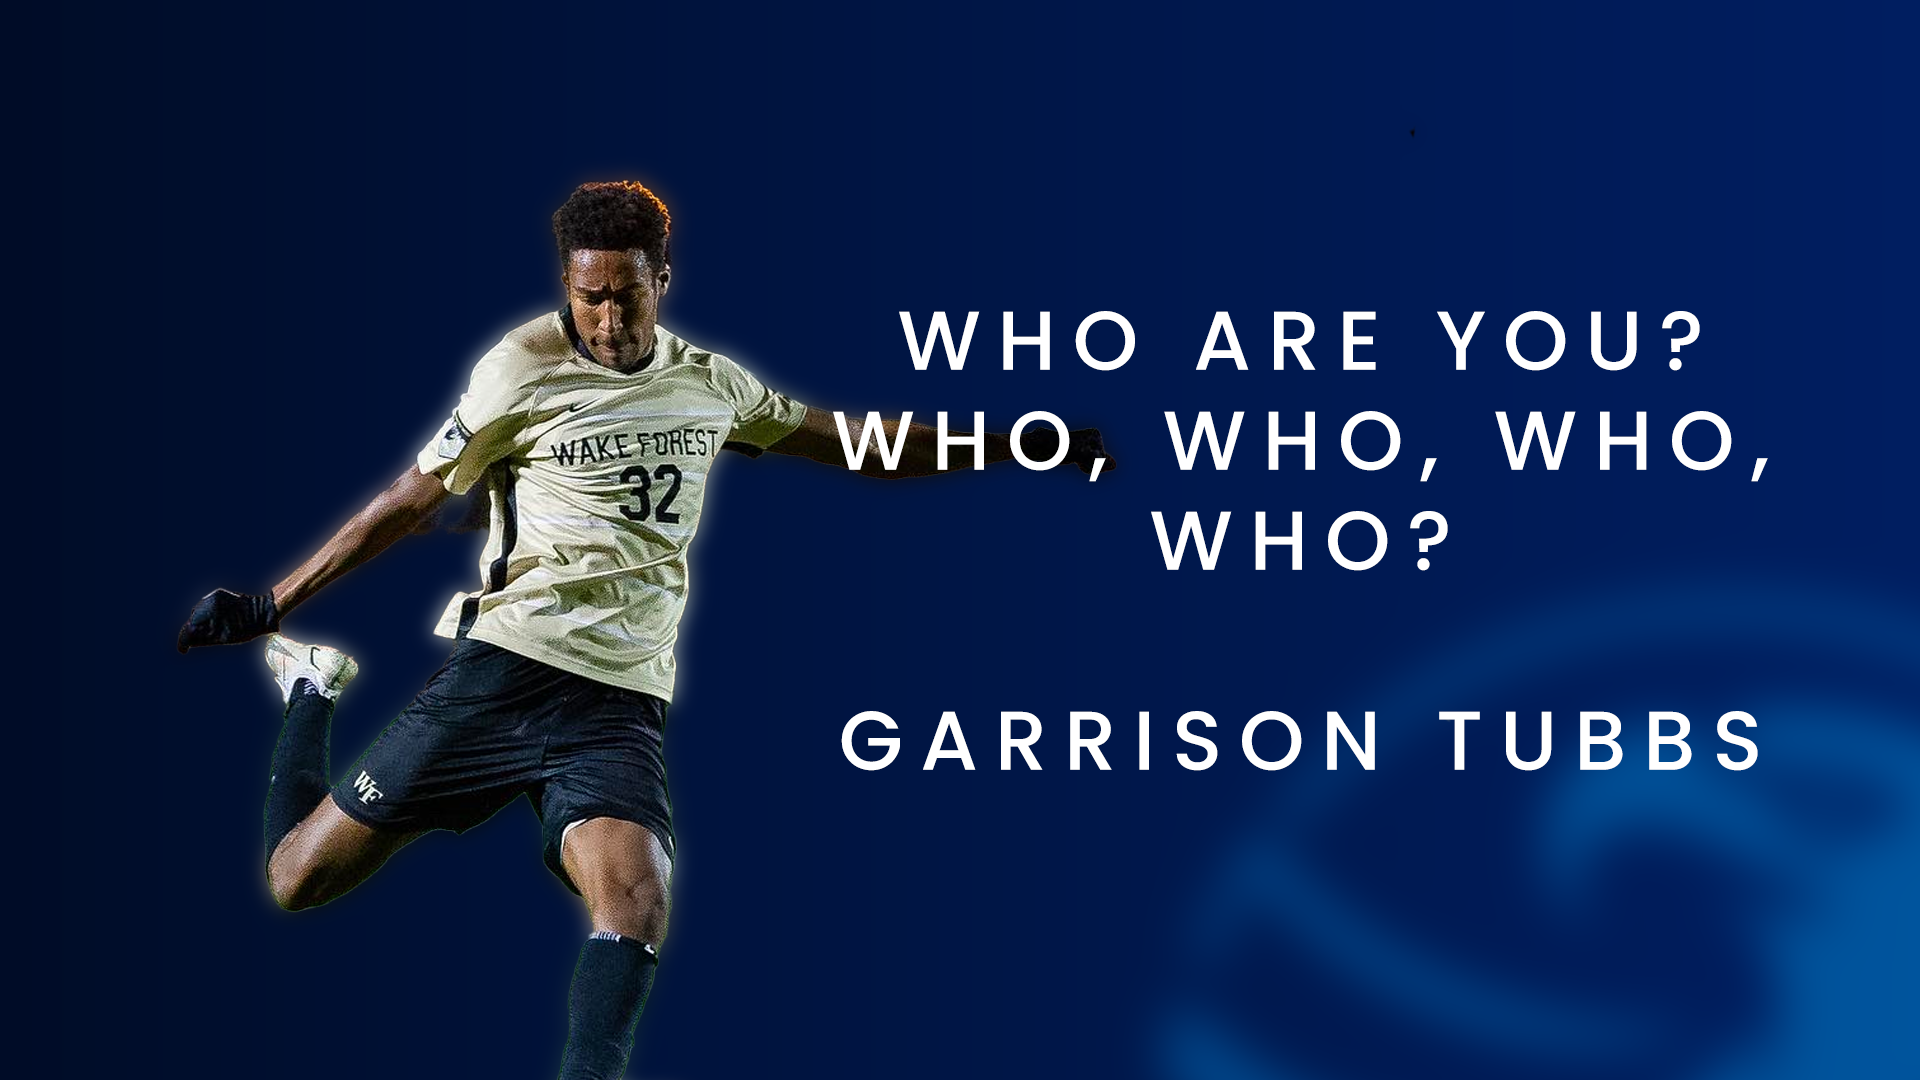 Who Are You? Who, who, who, who? Garrison Tubbs